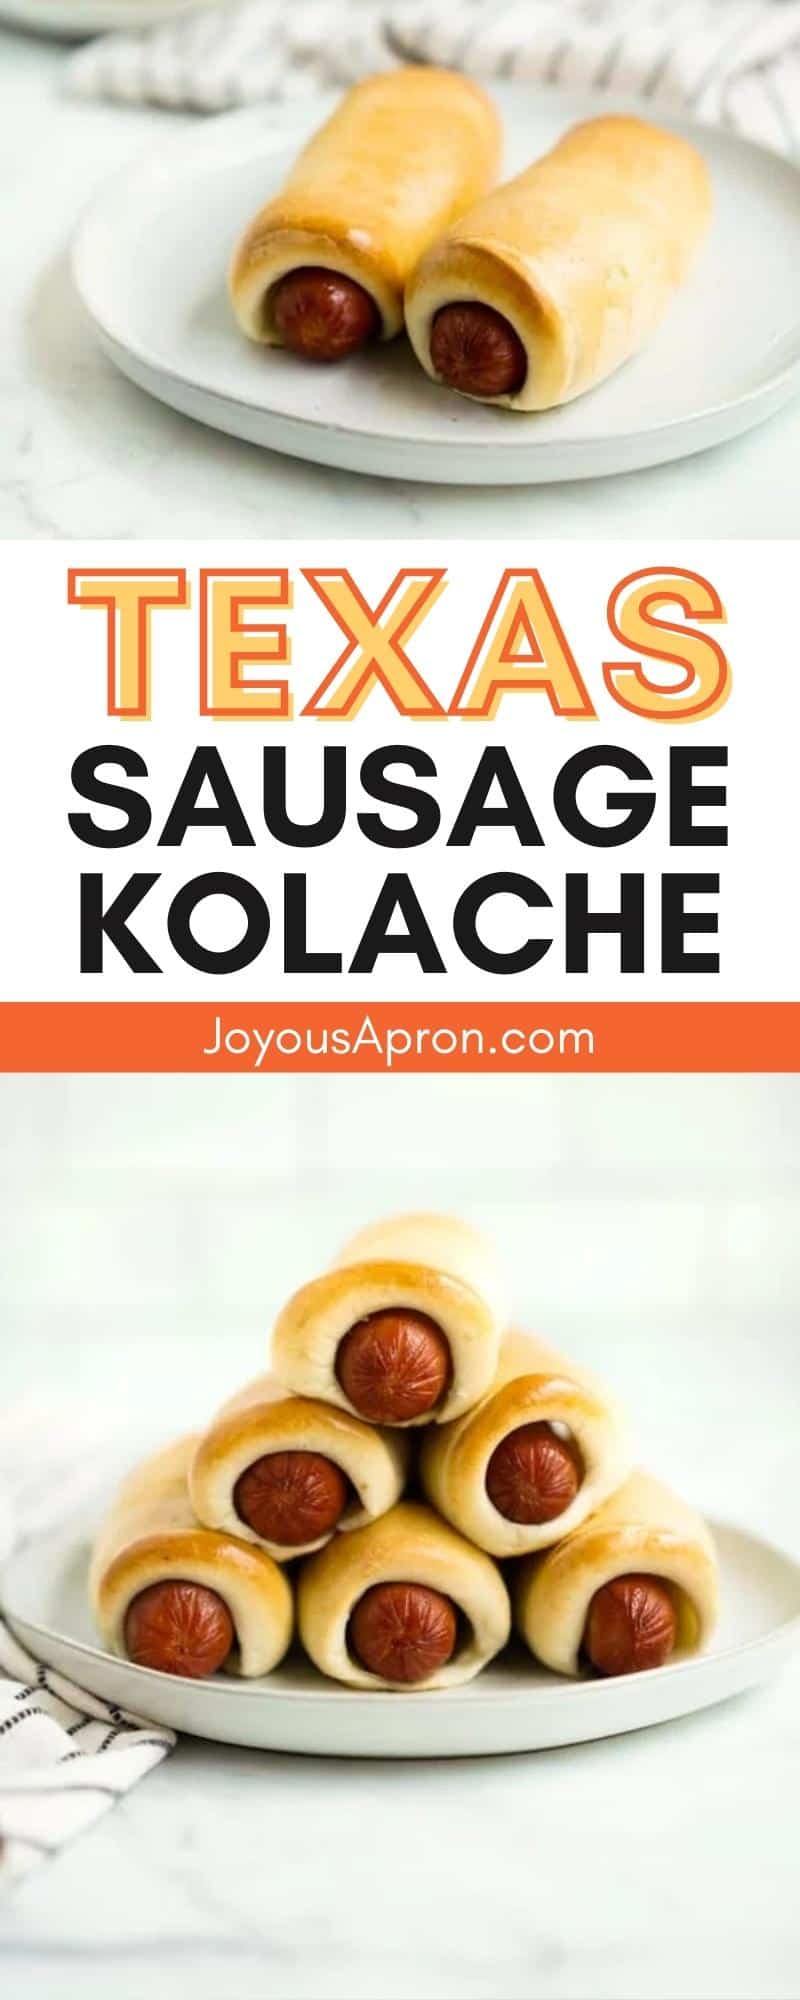 Texas Sausage Kolache - the easiest kolache recipe! a.k.a. sausage rolls, cheesy sausage is wrapped around a soft pillowy bread. A popular breakfast and snack found in donut shops across Texas! via @joyousapron